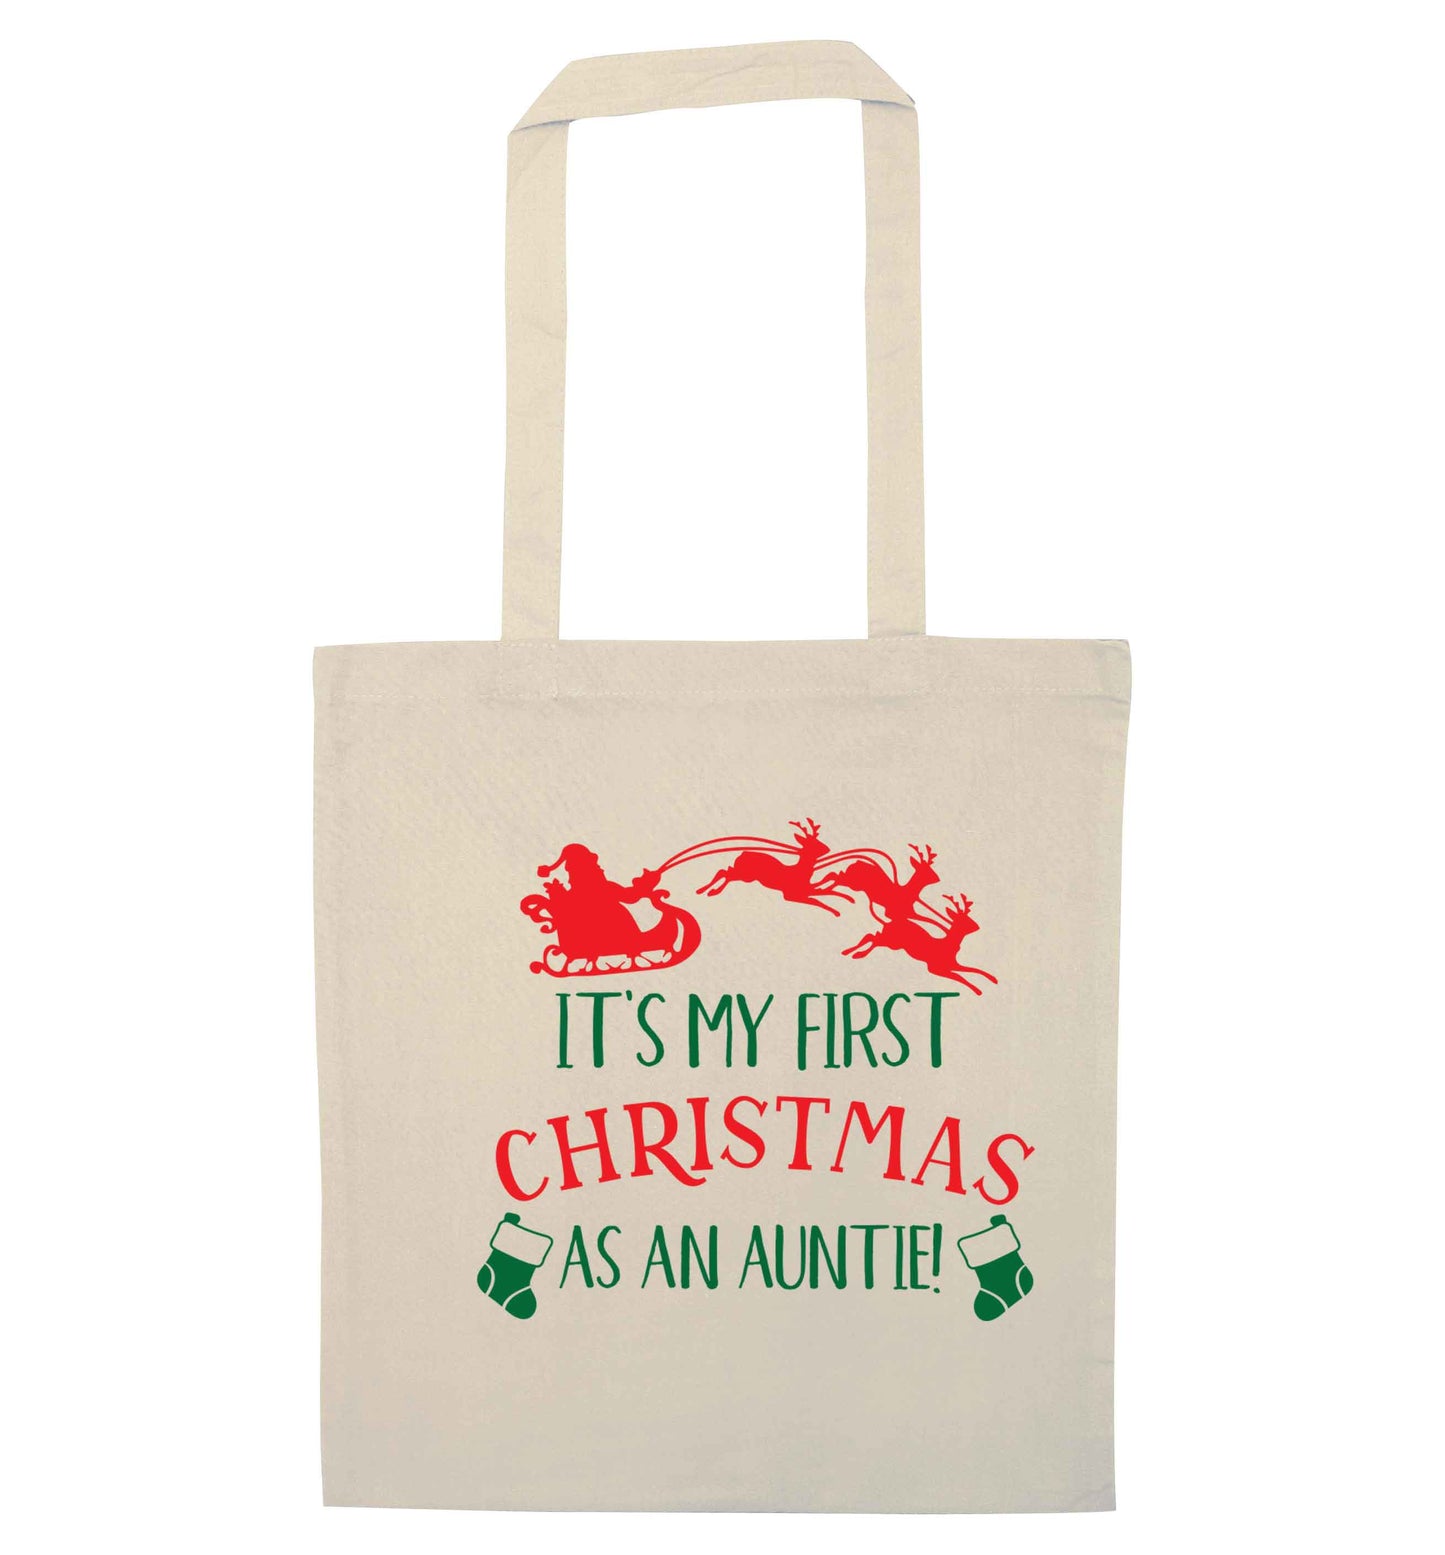 It's my first Christmas as an auntie! natural tote bag